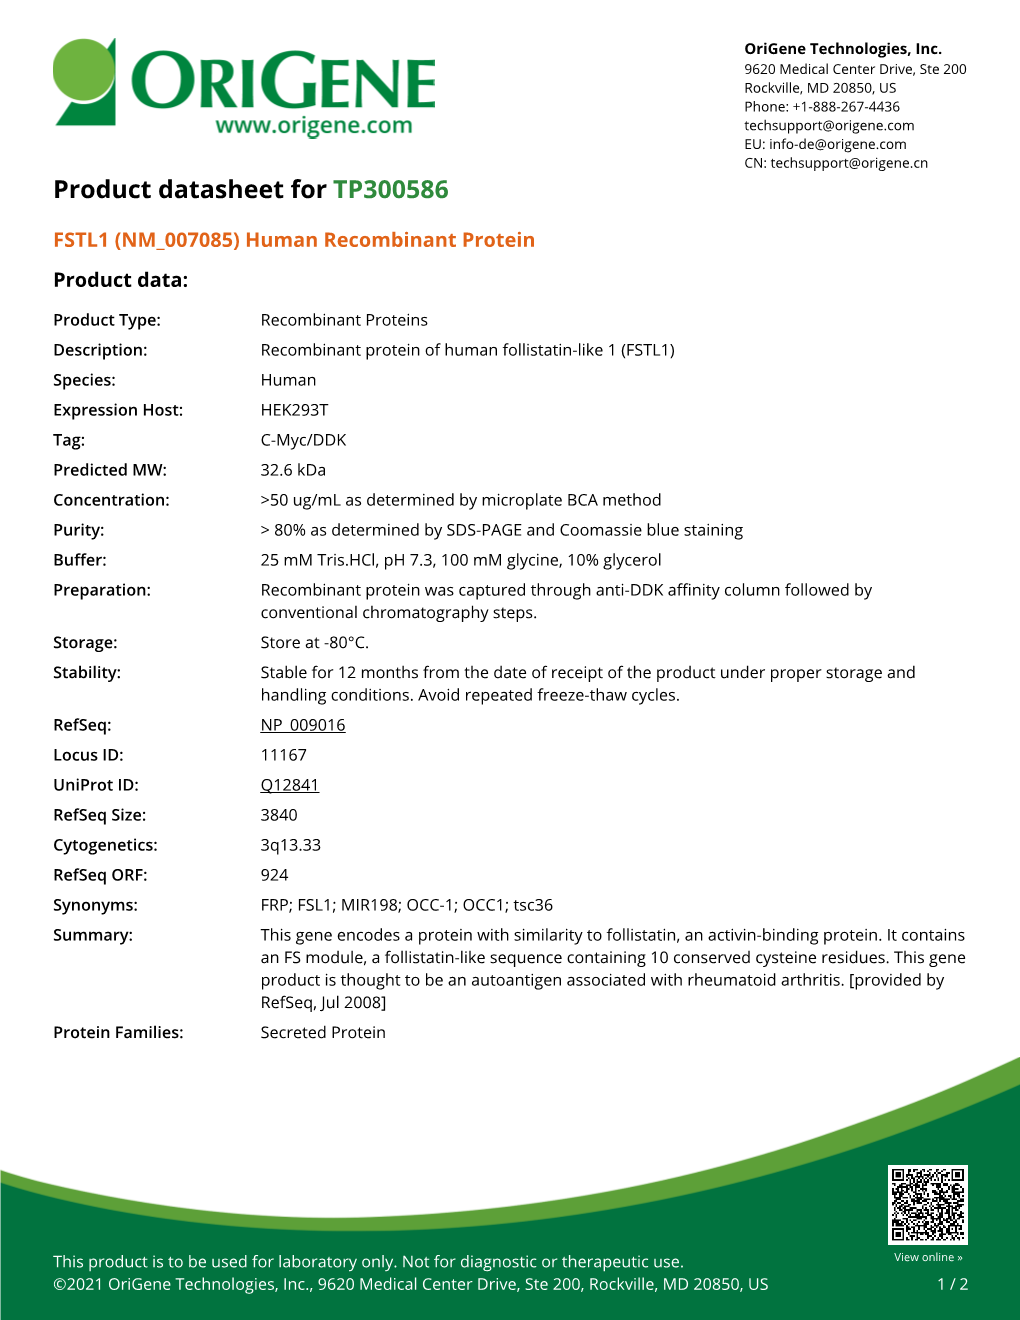 FSTL1 (NM 007085) Human Recombinant Protein Product Data